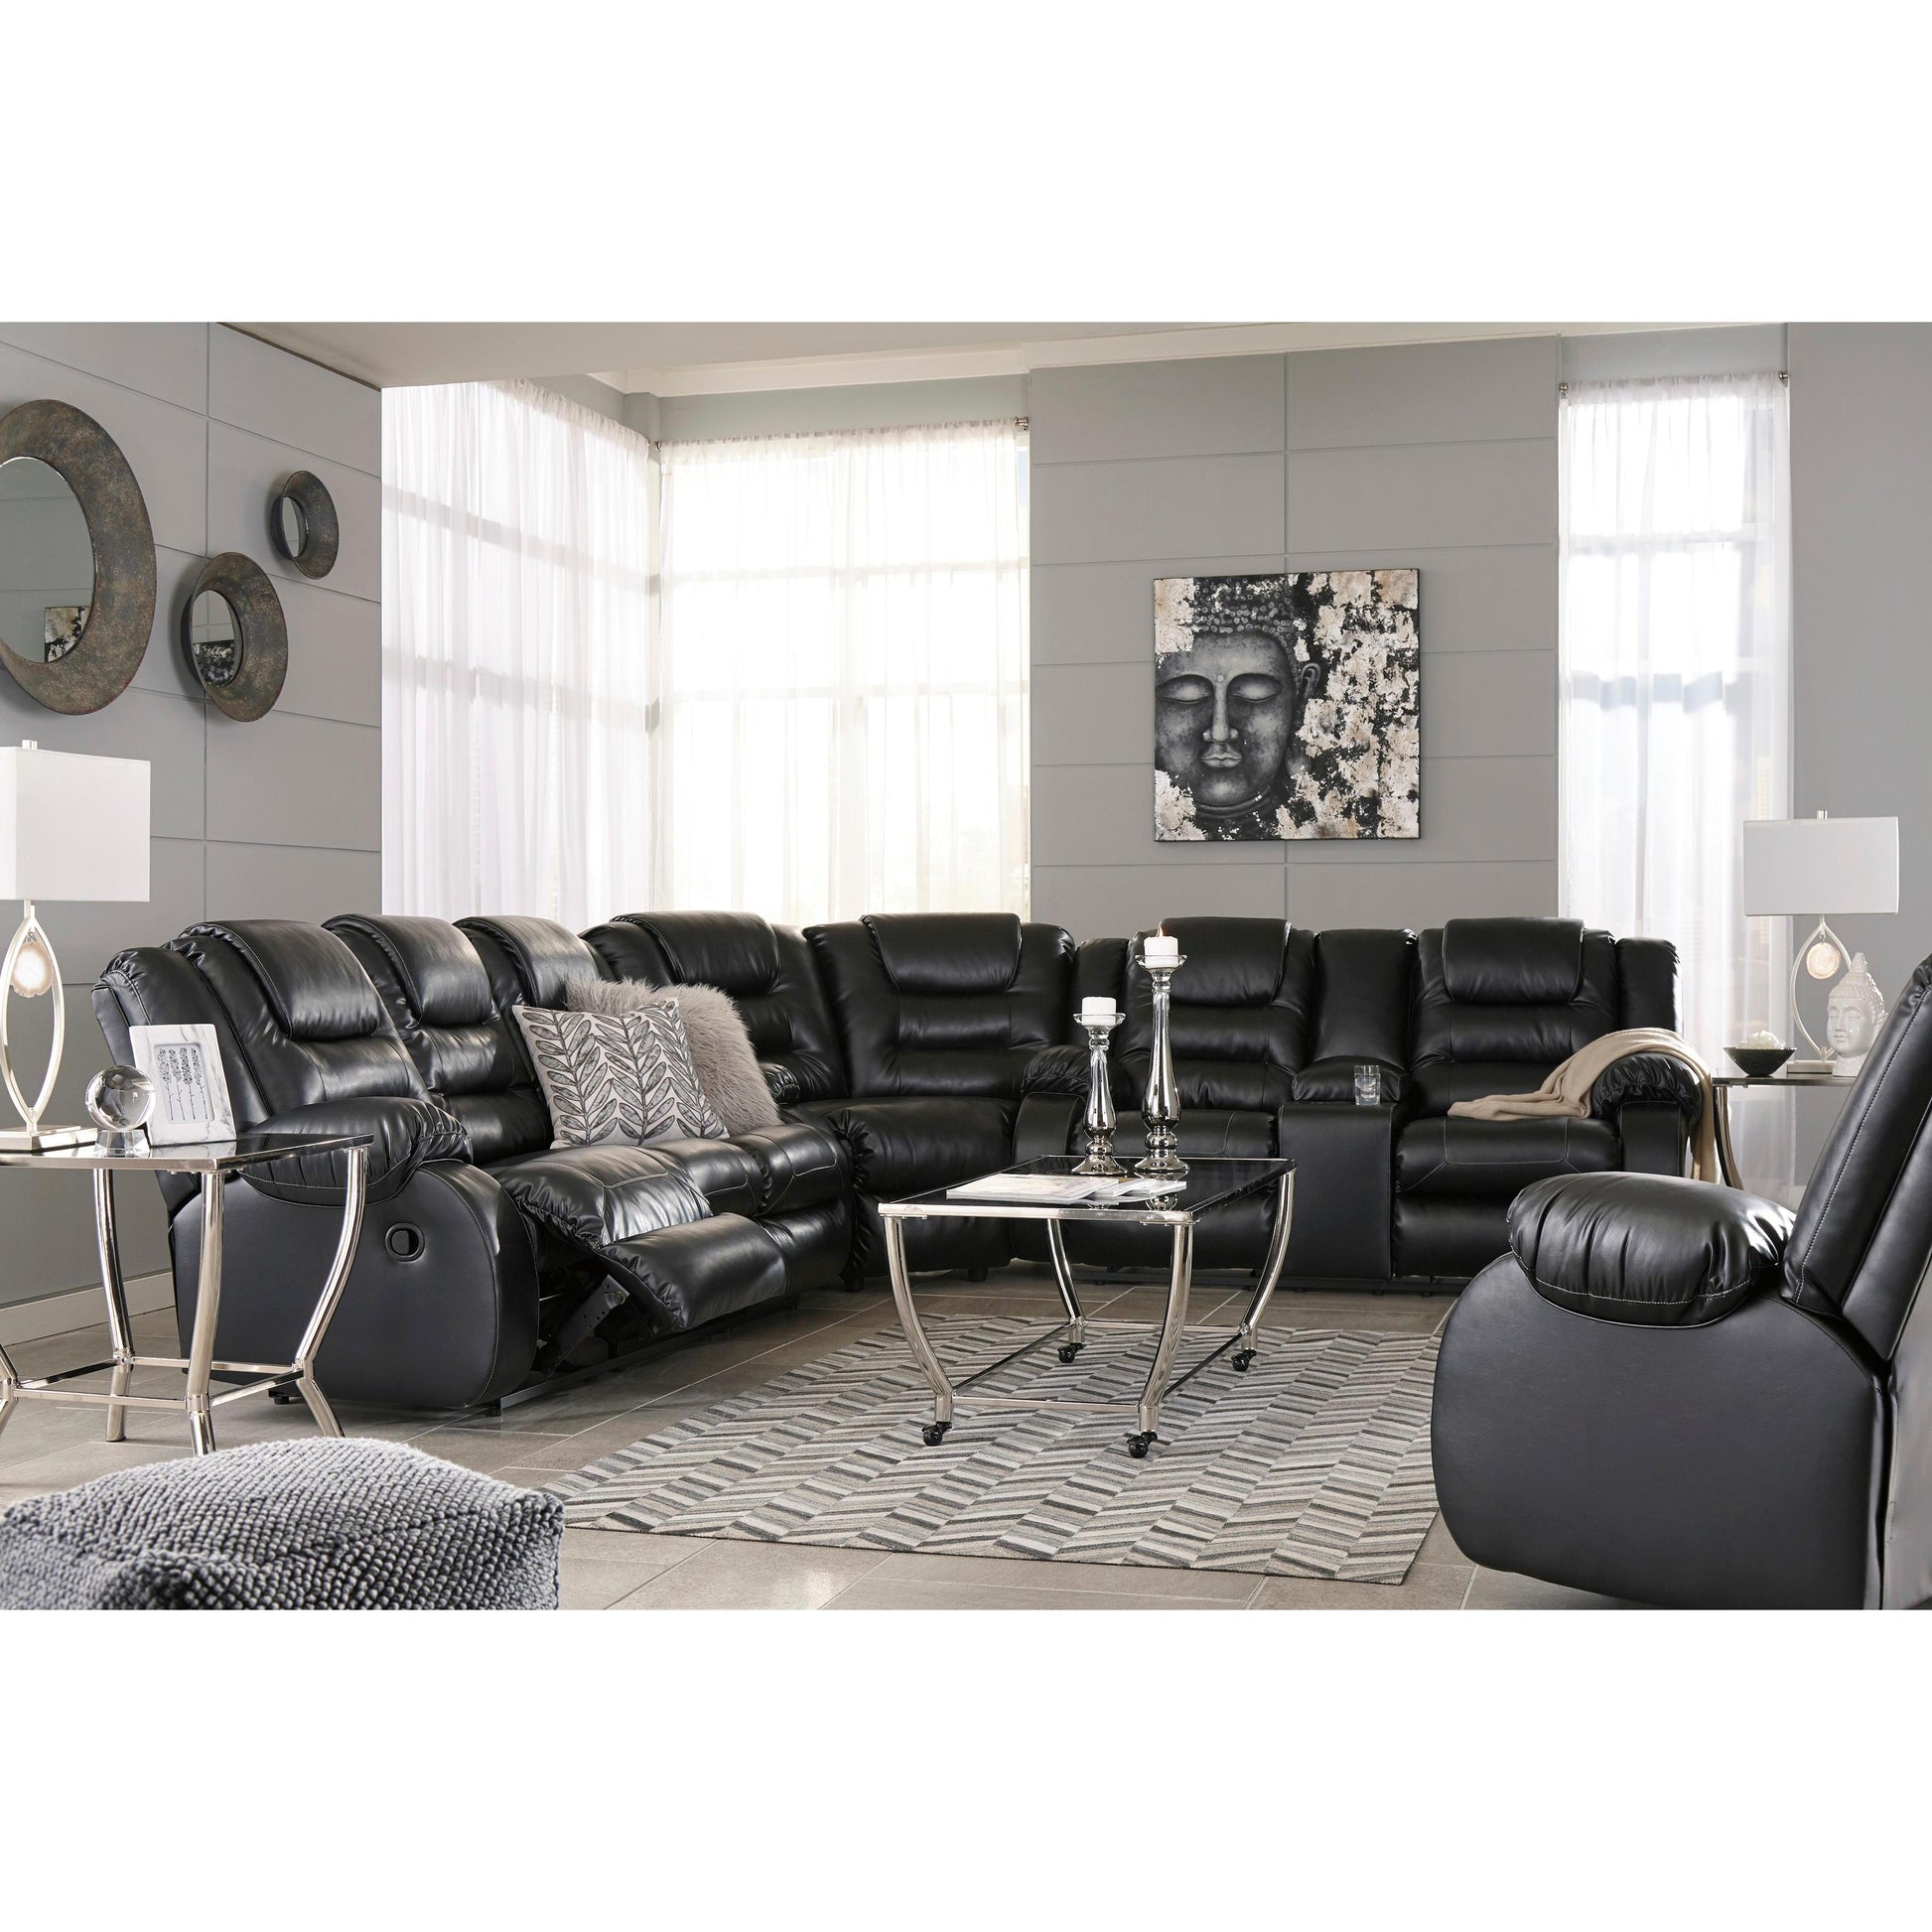 Signature Design by Ashley Vacherie Reclining Leather Look Loveseat 7930894